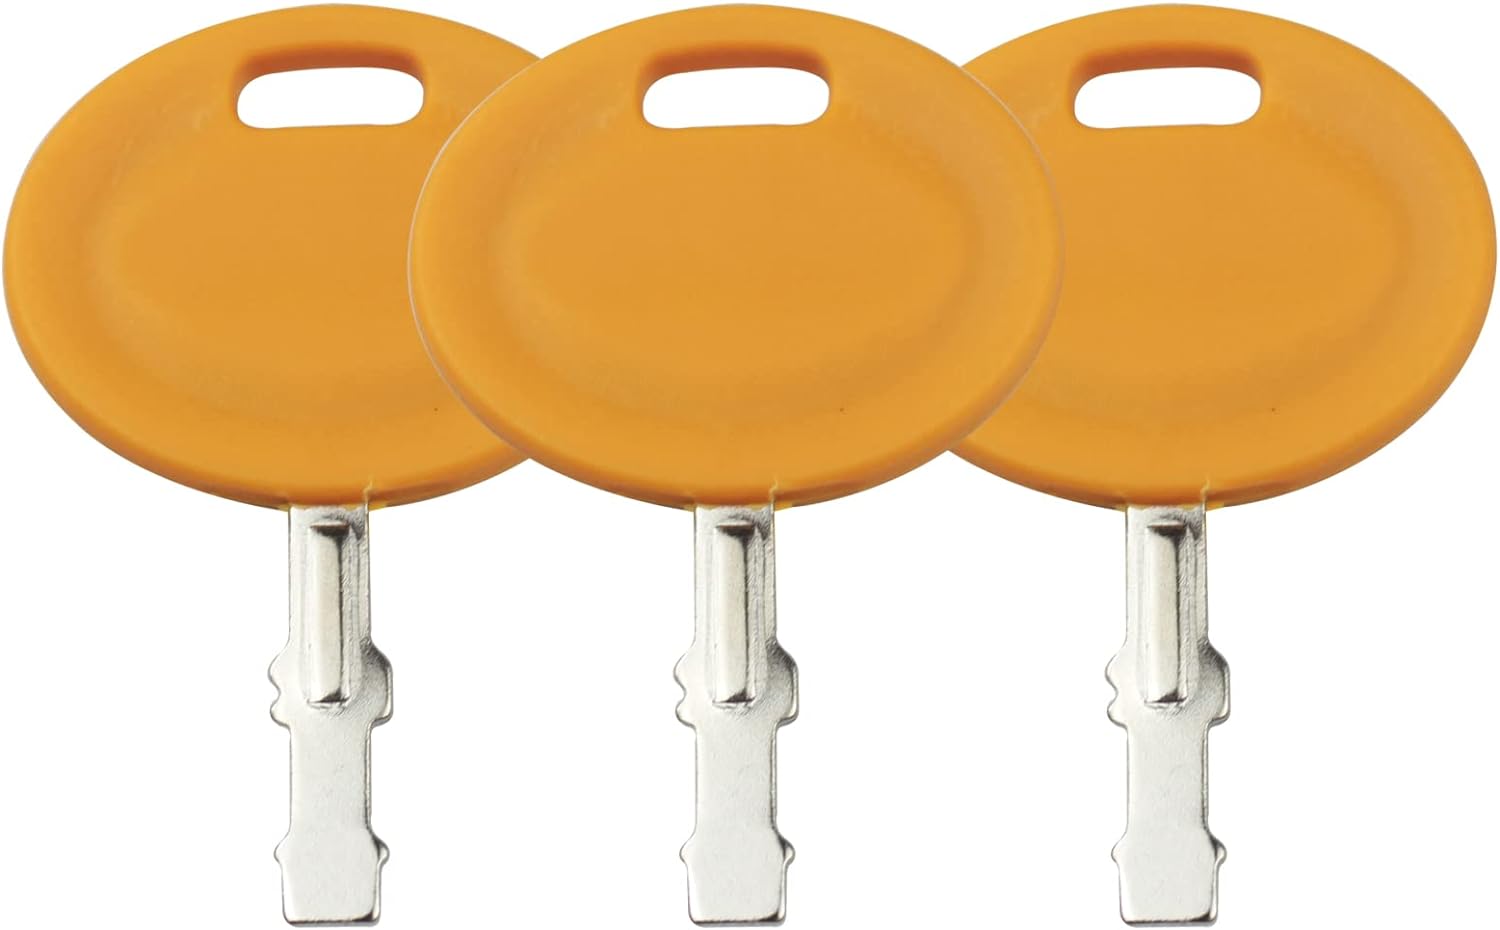 Gradora 6PCS Ignition Keys Replacement: A Reliable Solution for Lawn Mower Owners